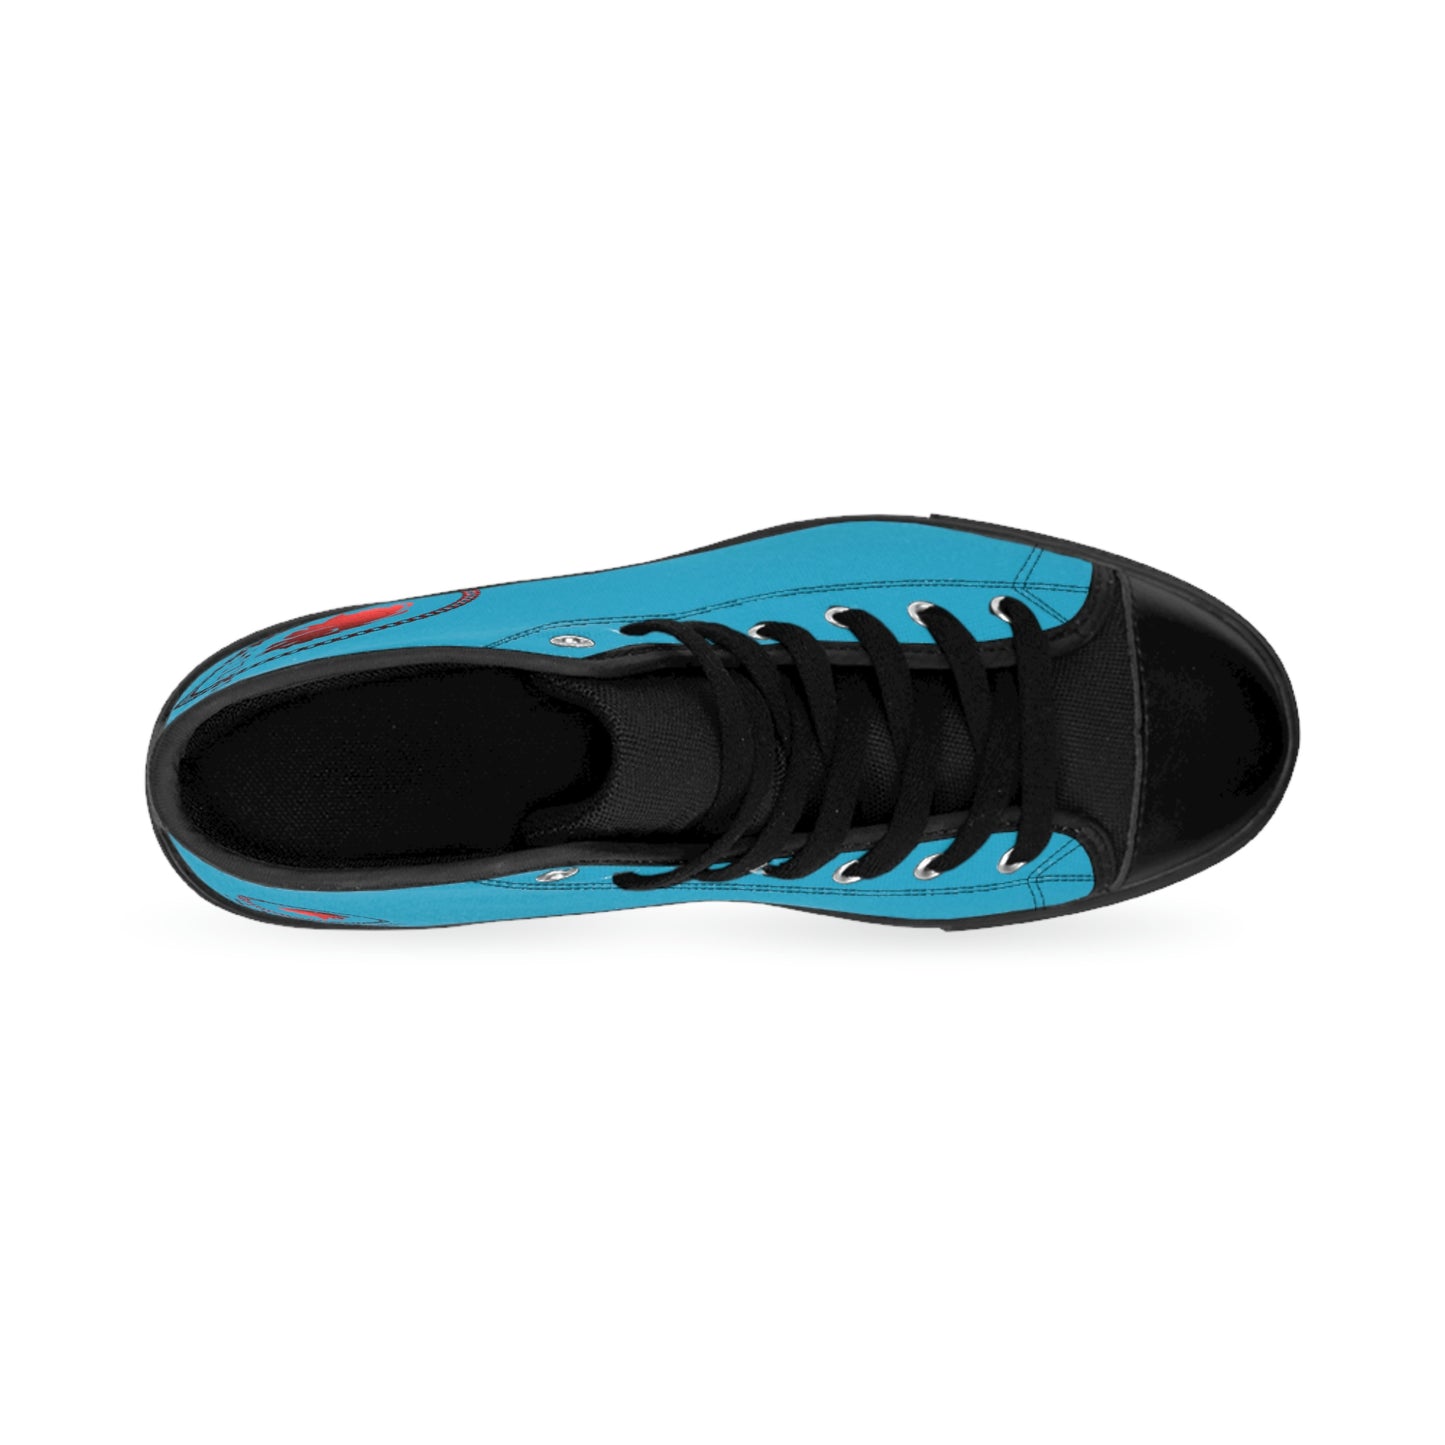 Red on Light blue, black sole/Men's Classic Sneakers